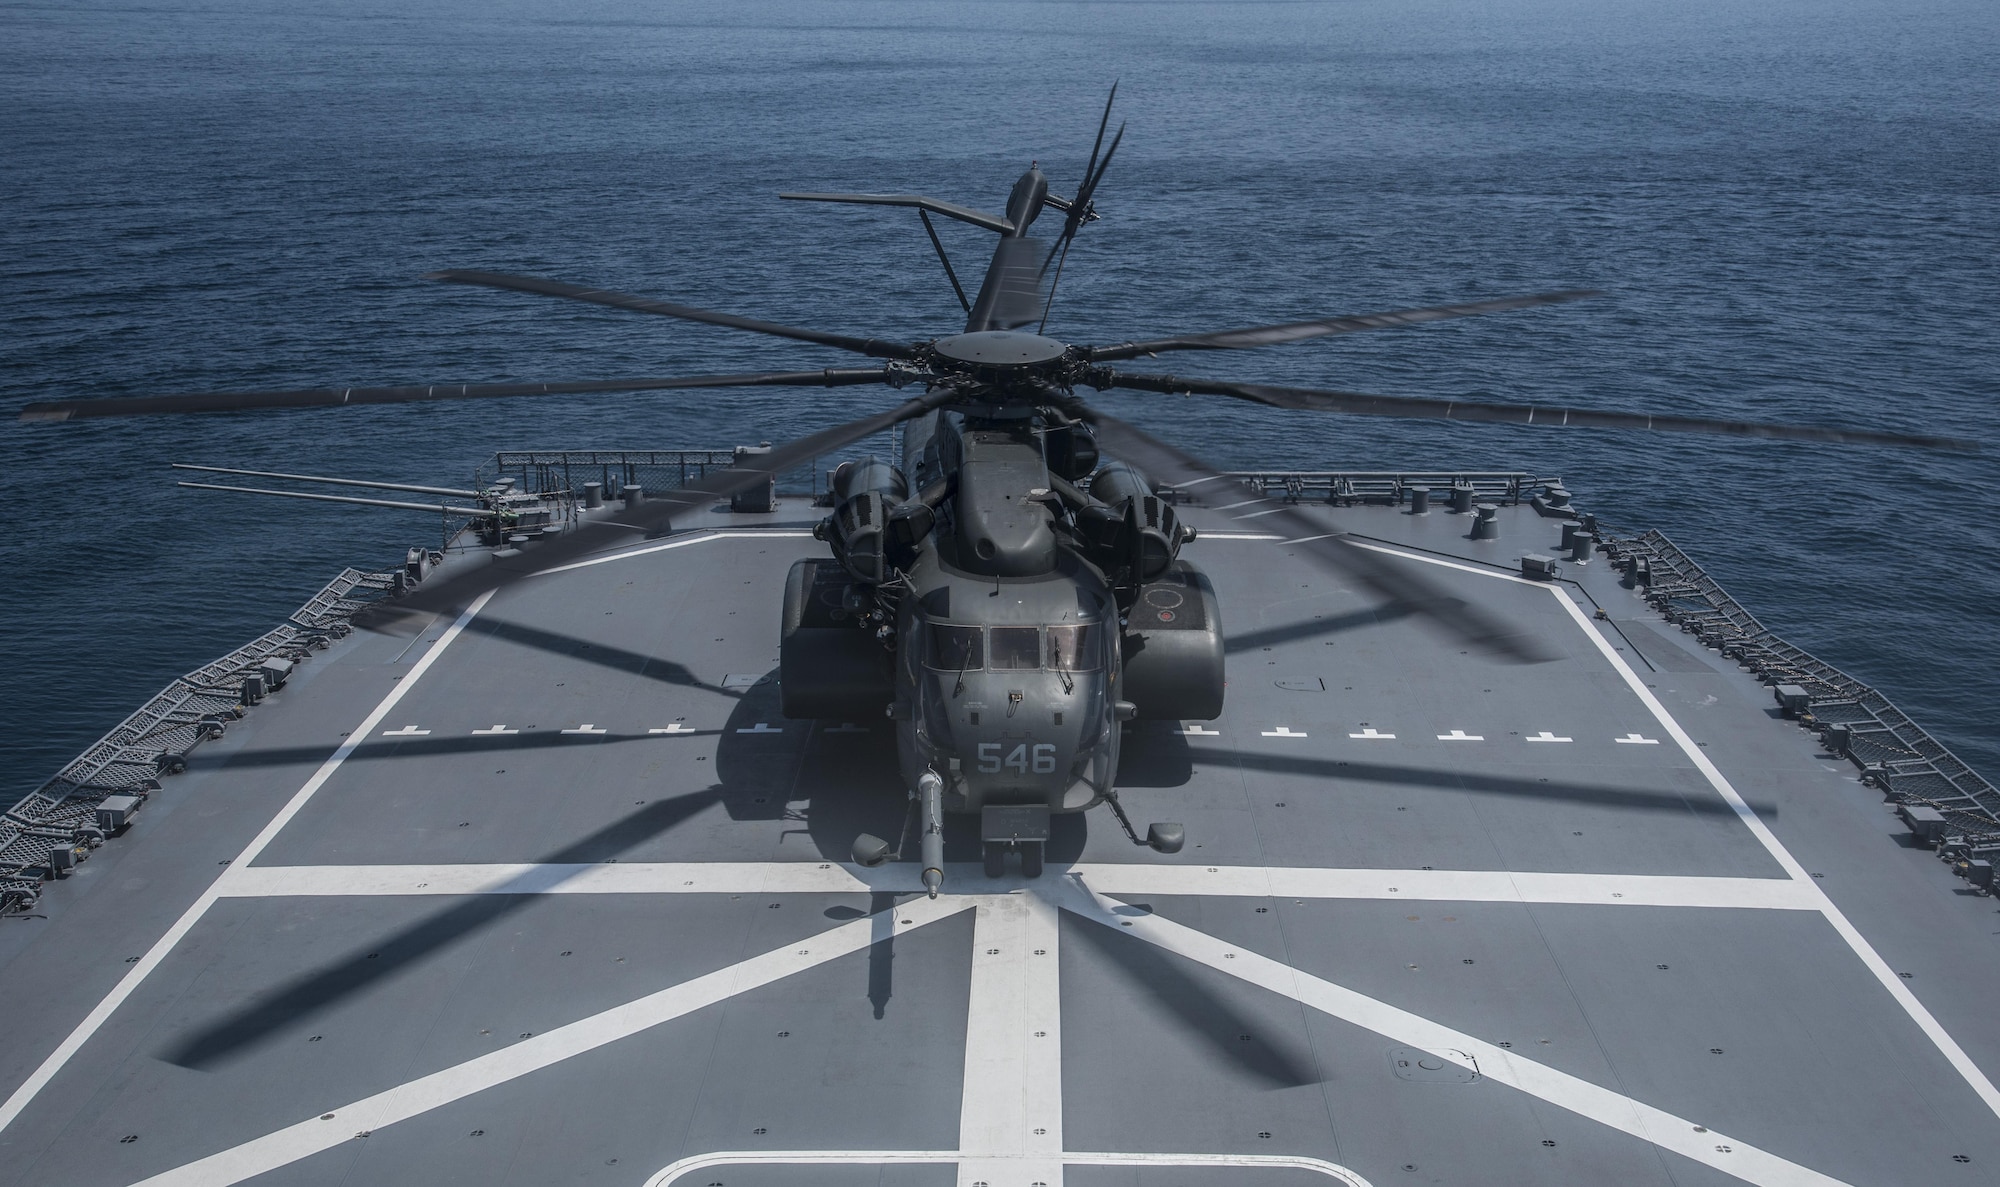 An MH-53E Sea Dragon lands on the JS Uraga while taking part in the 2016 Mine Countermeasures Exercise in Mutsu Bay, Japan, July 22, 2016. The Japan Maritime Self-Defense Force vessel’s crew teamed up with the U.S. Navy helicopter’s unit to train for the boat landing aspect of mine countermeasures. By improving response times and strengthening relations, the services aim to not only become more adept at their mission, but also to deter their enemy’s willingness to mine. (U.S. Air Force photo by Senior Airman Jordyn Fetter)